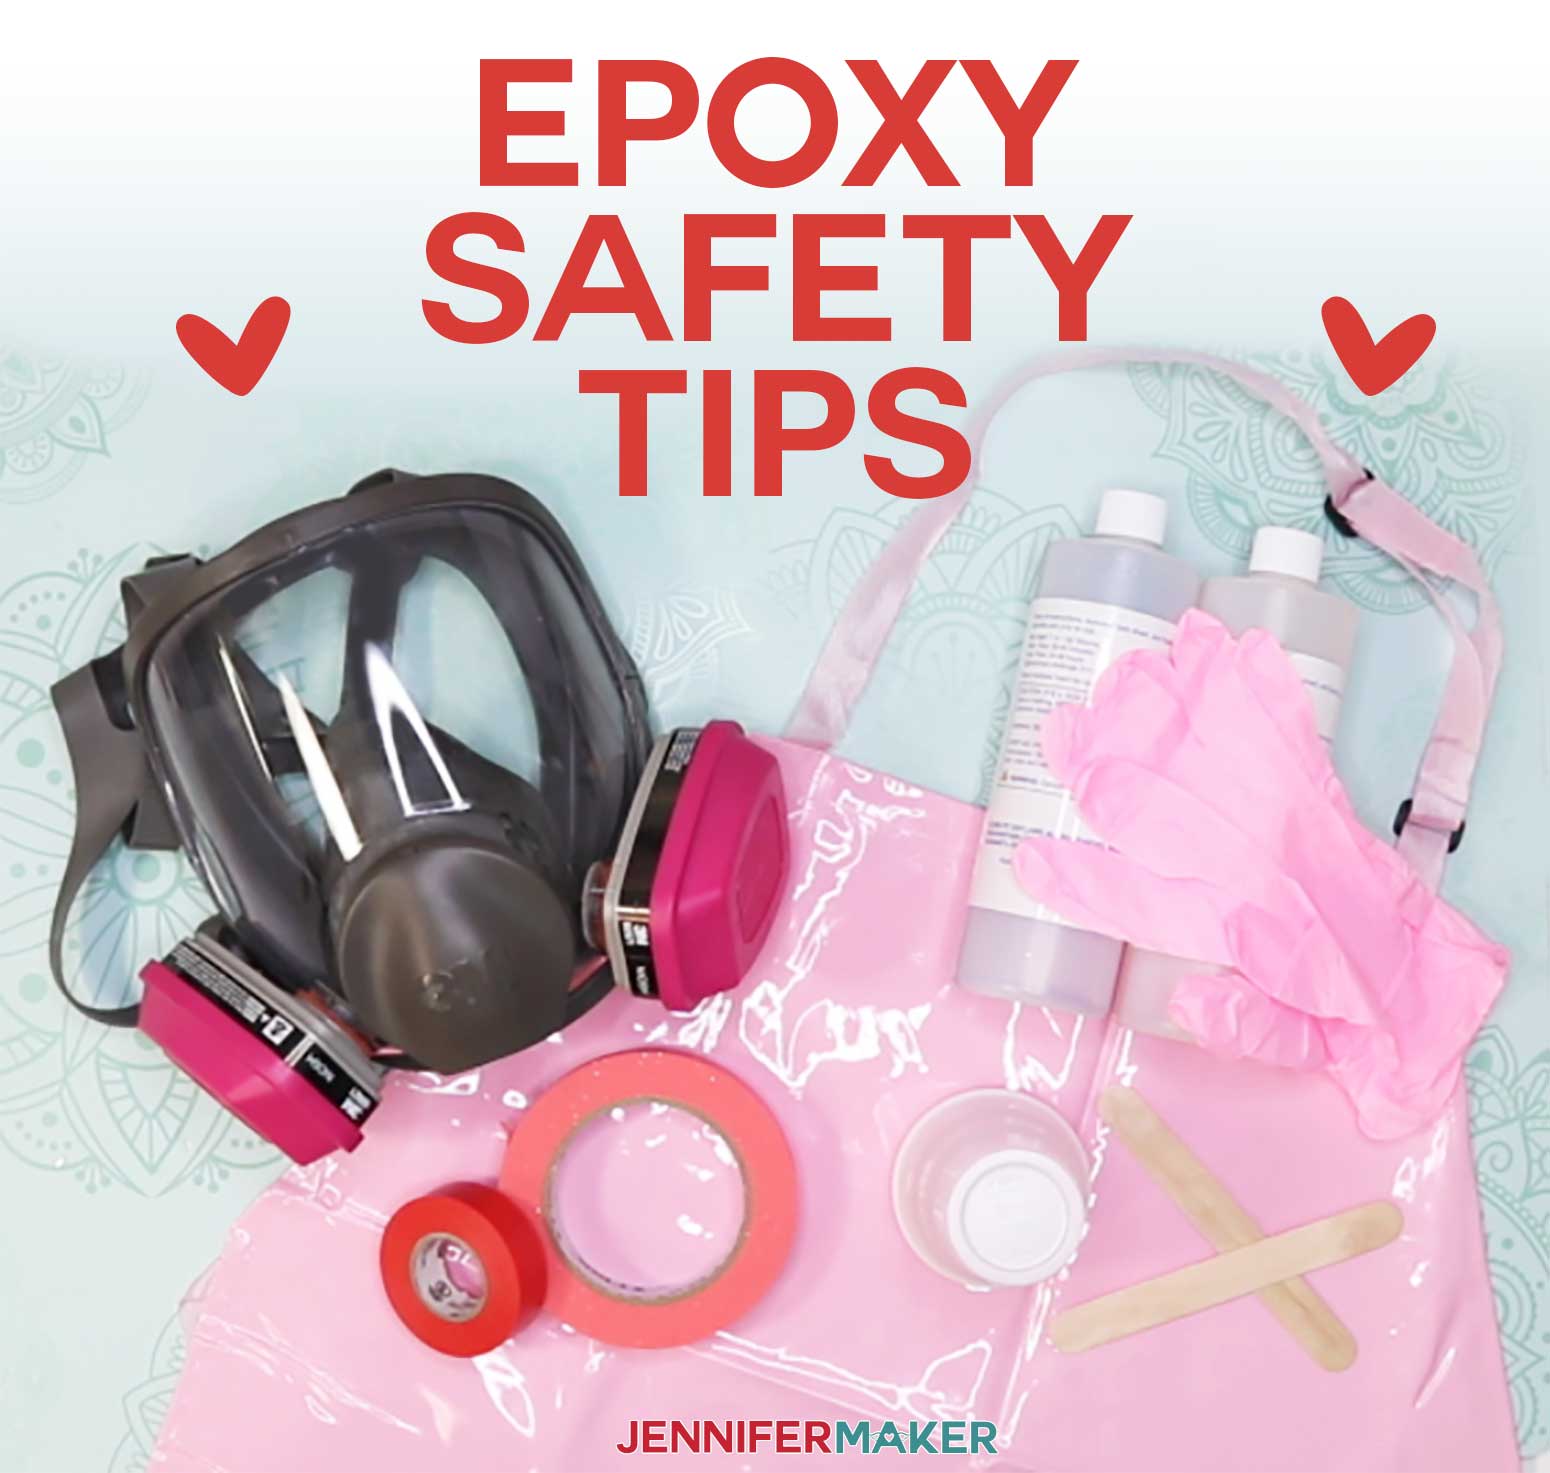 Epoxy Safety for Safe Tumbler Making: Tips, Supplies, Personal Protective Equipment #epoxy #tumblers #safety